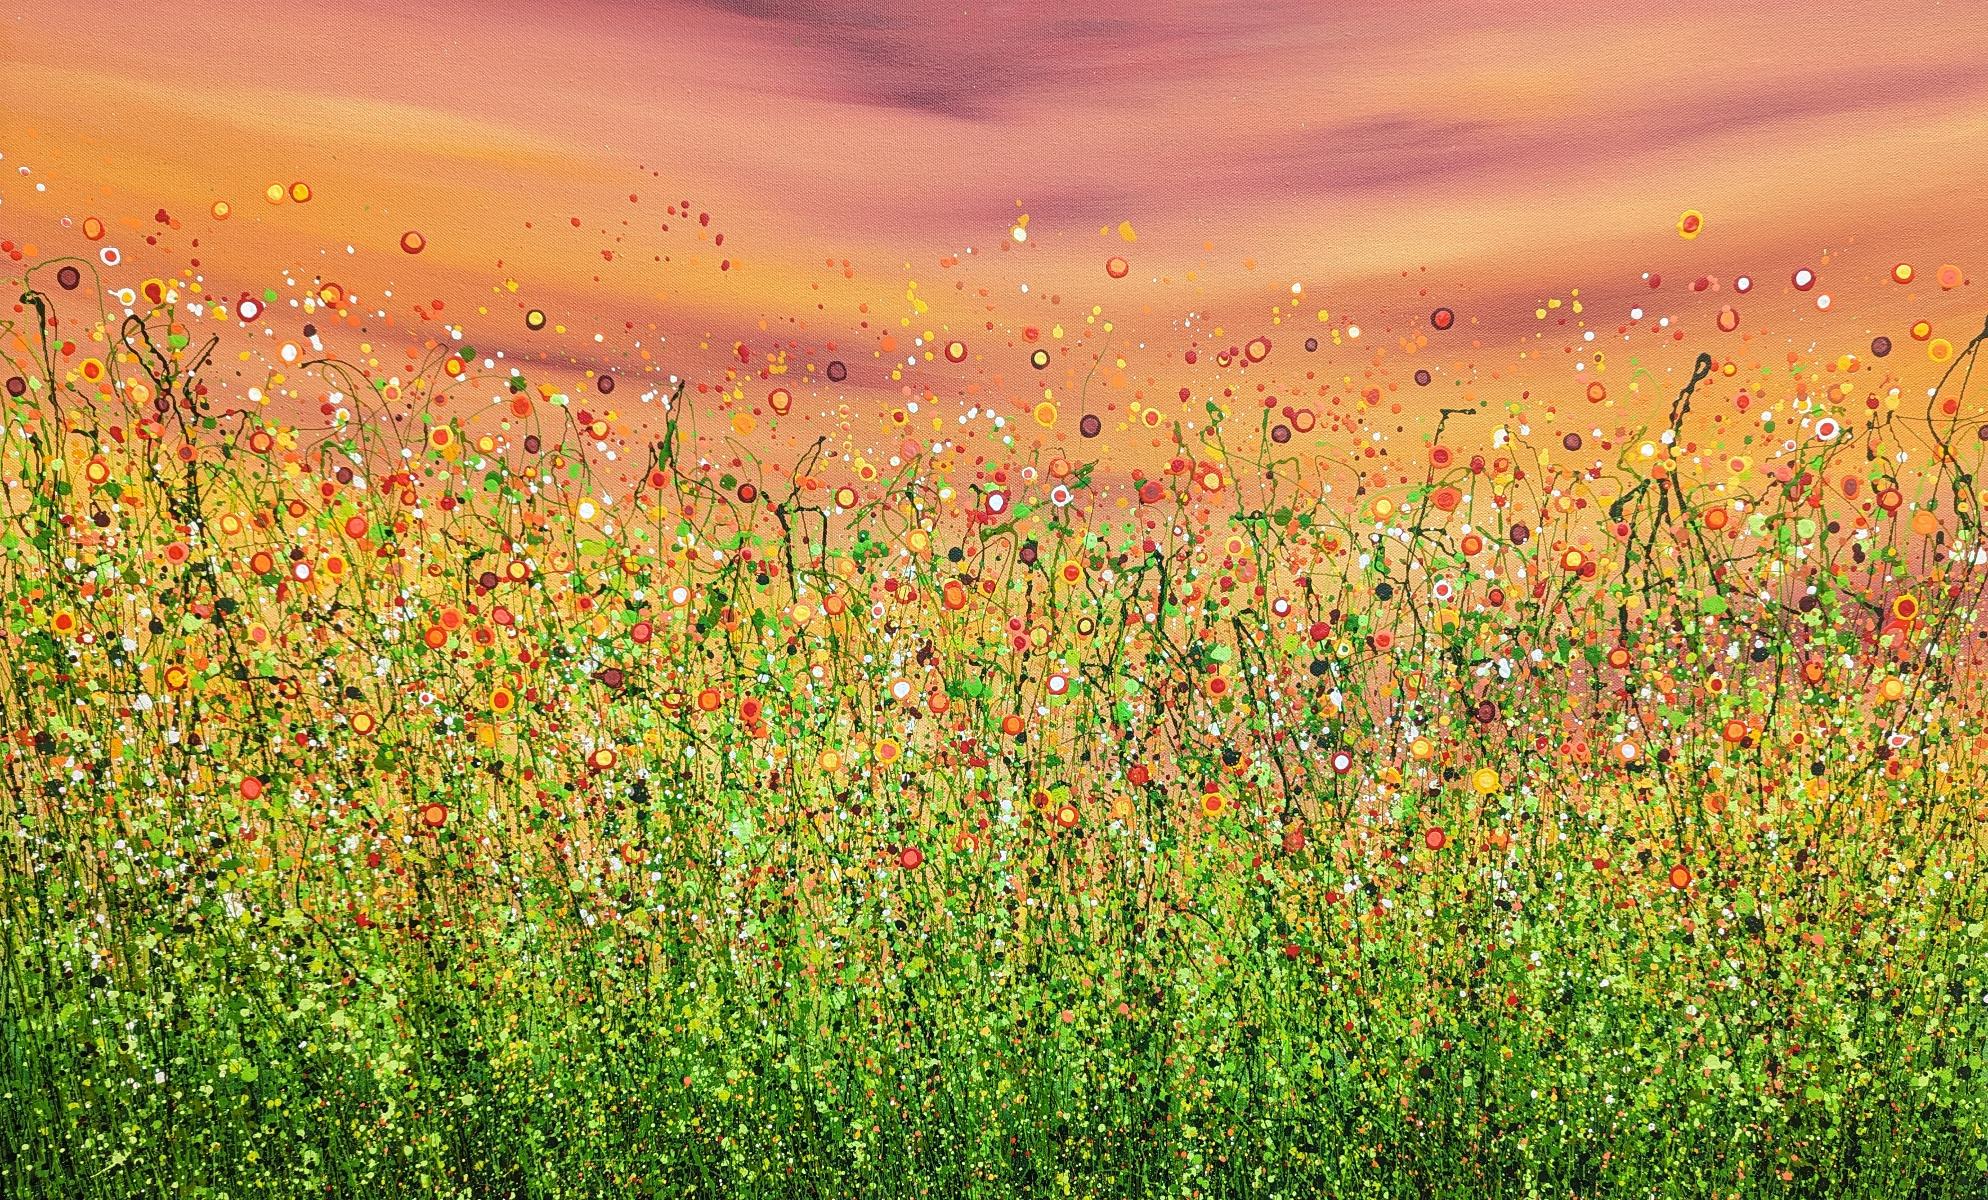 Popping Sunrise Meadows #2, Abstract Floral Painting, Original Landscape Art